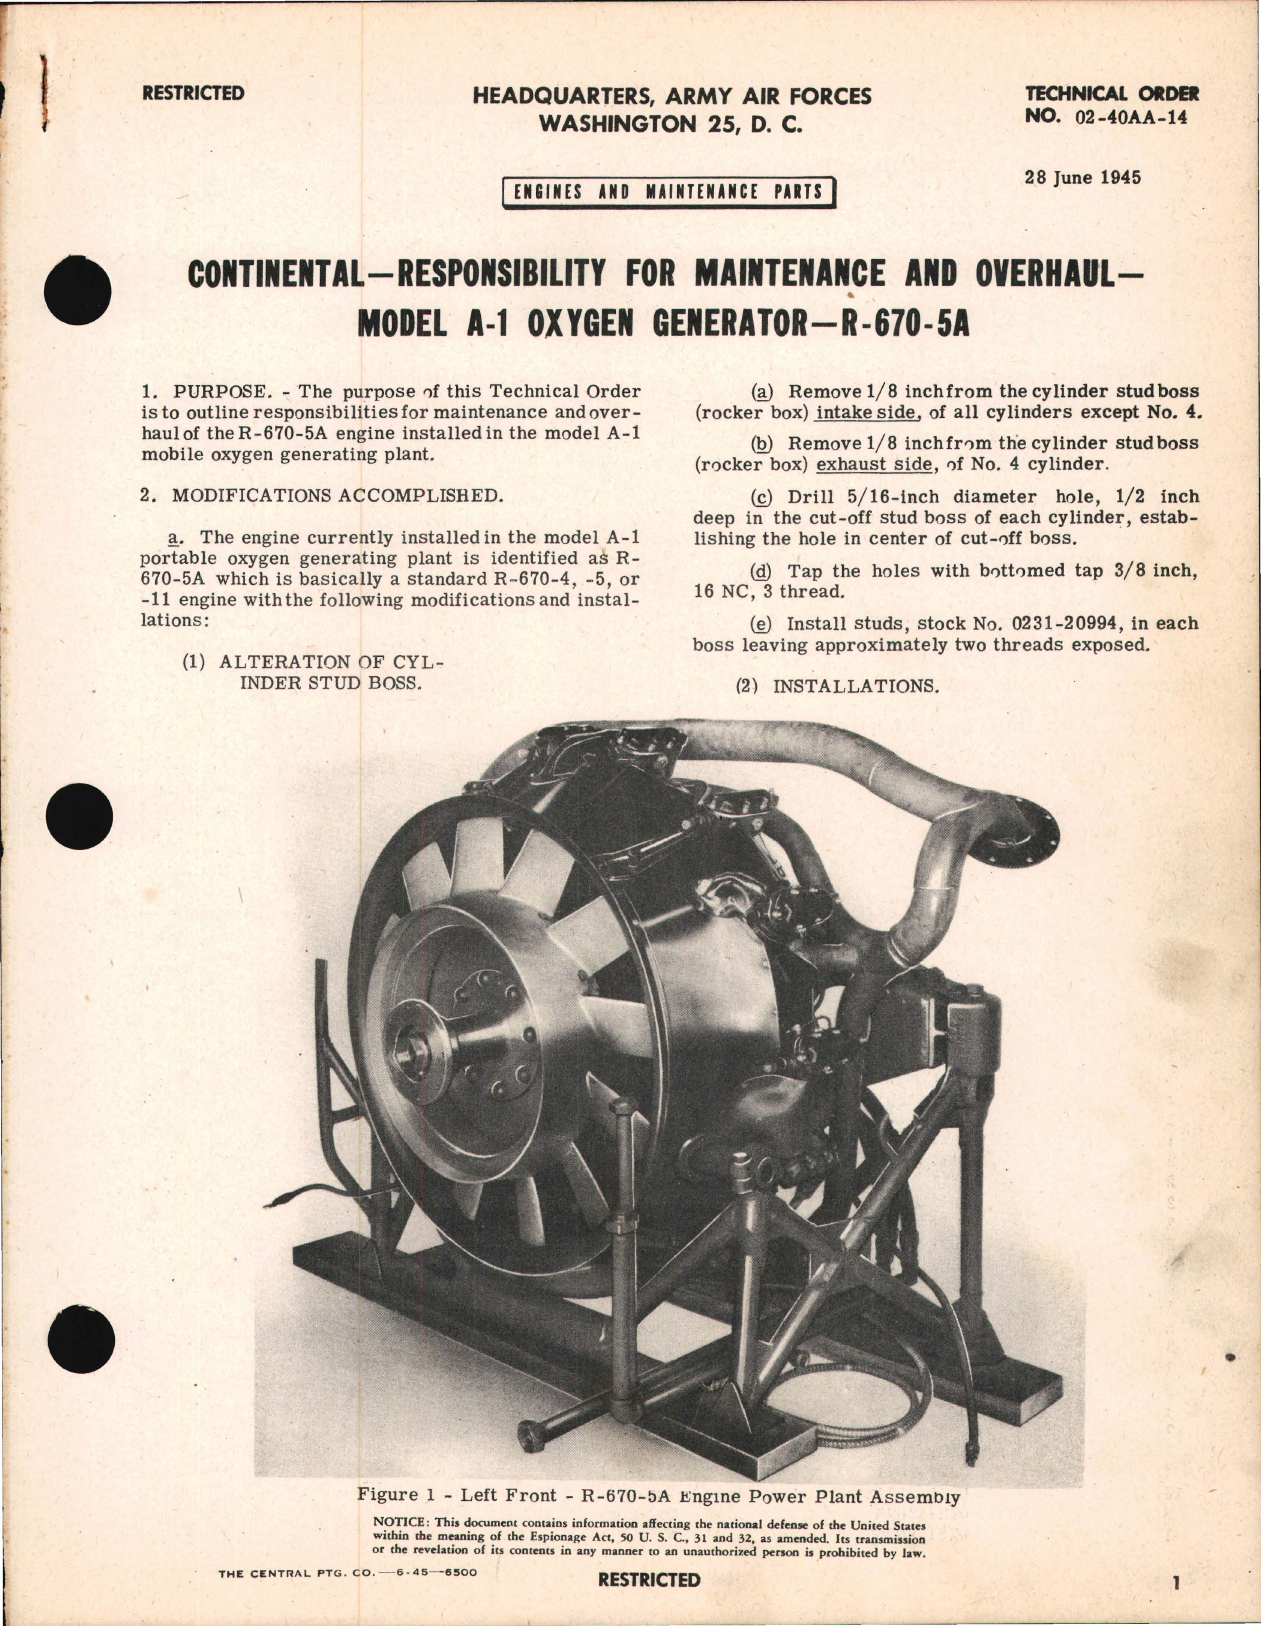 Sample page 1 from AirCorps Library document: Responsibility for Maintenance and Overhaul - Model A-1 Oxygen Generator - R-670-5A Engine